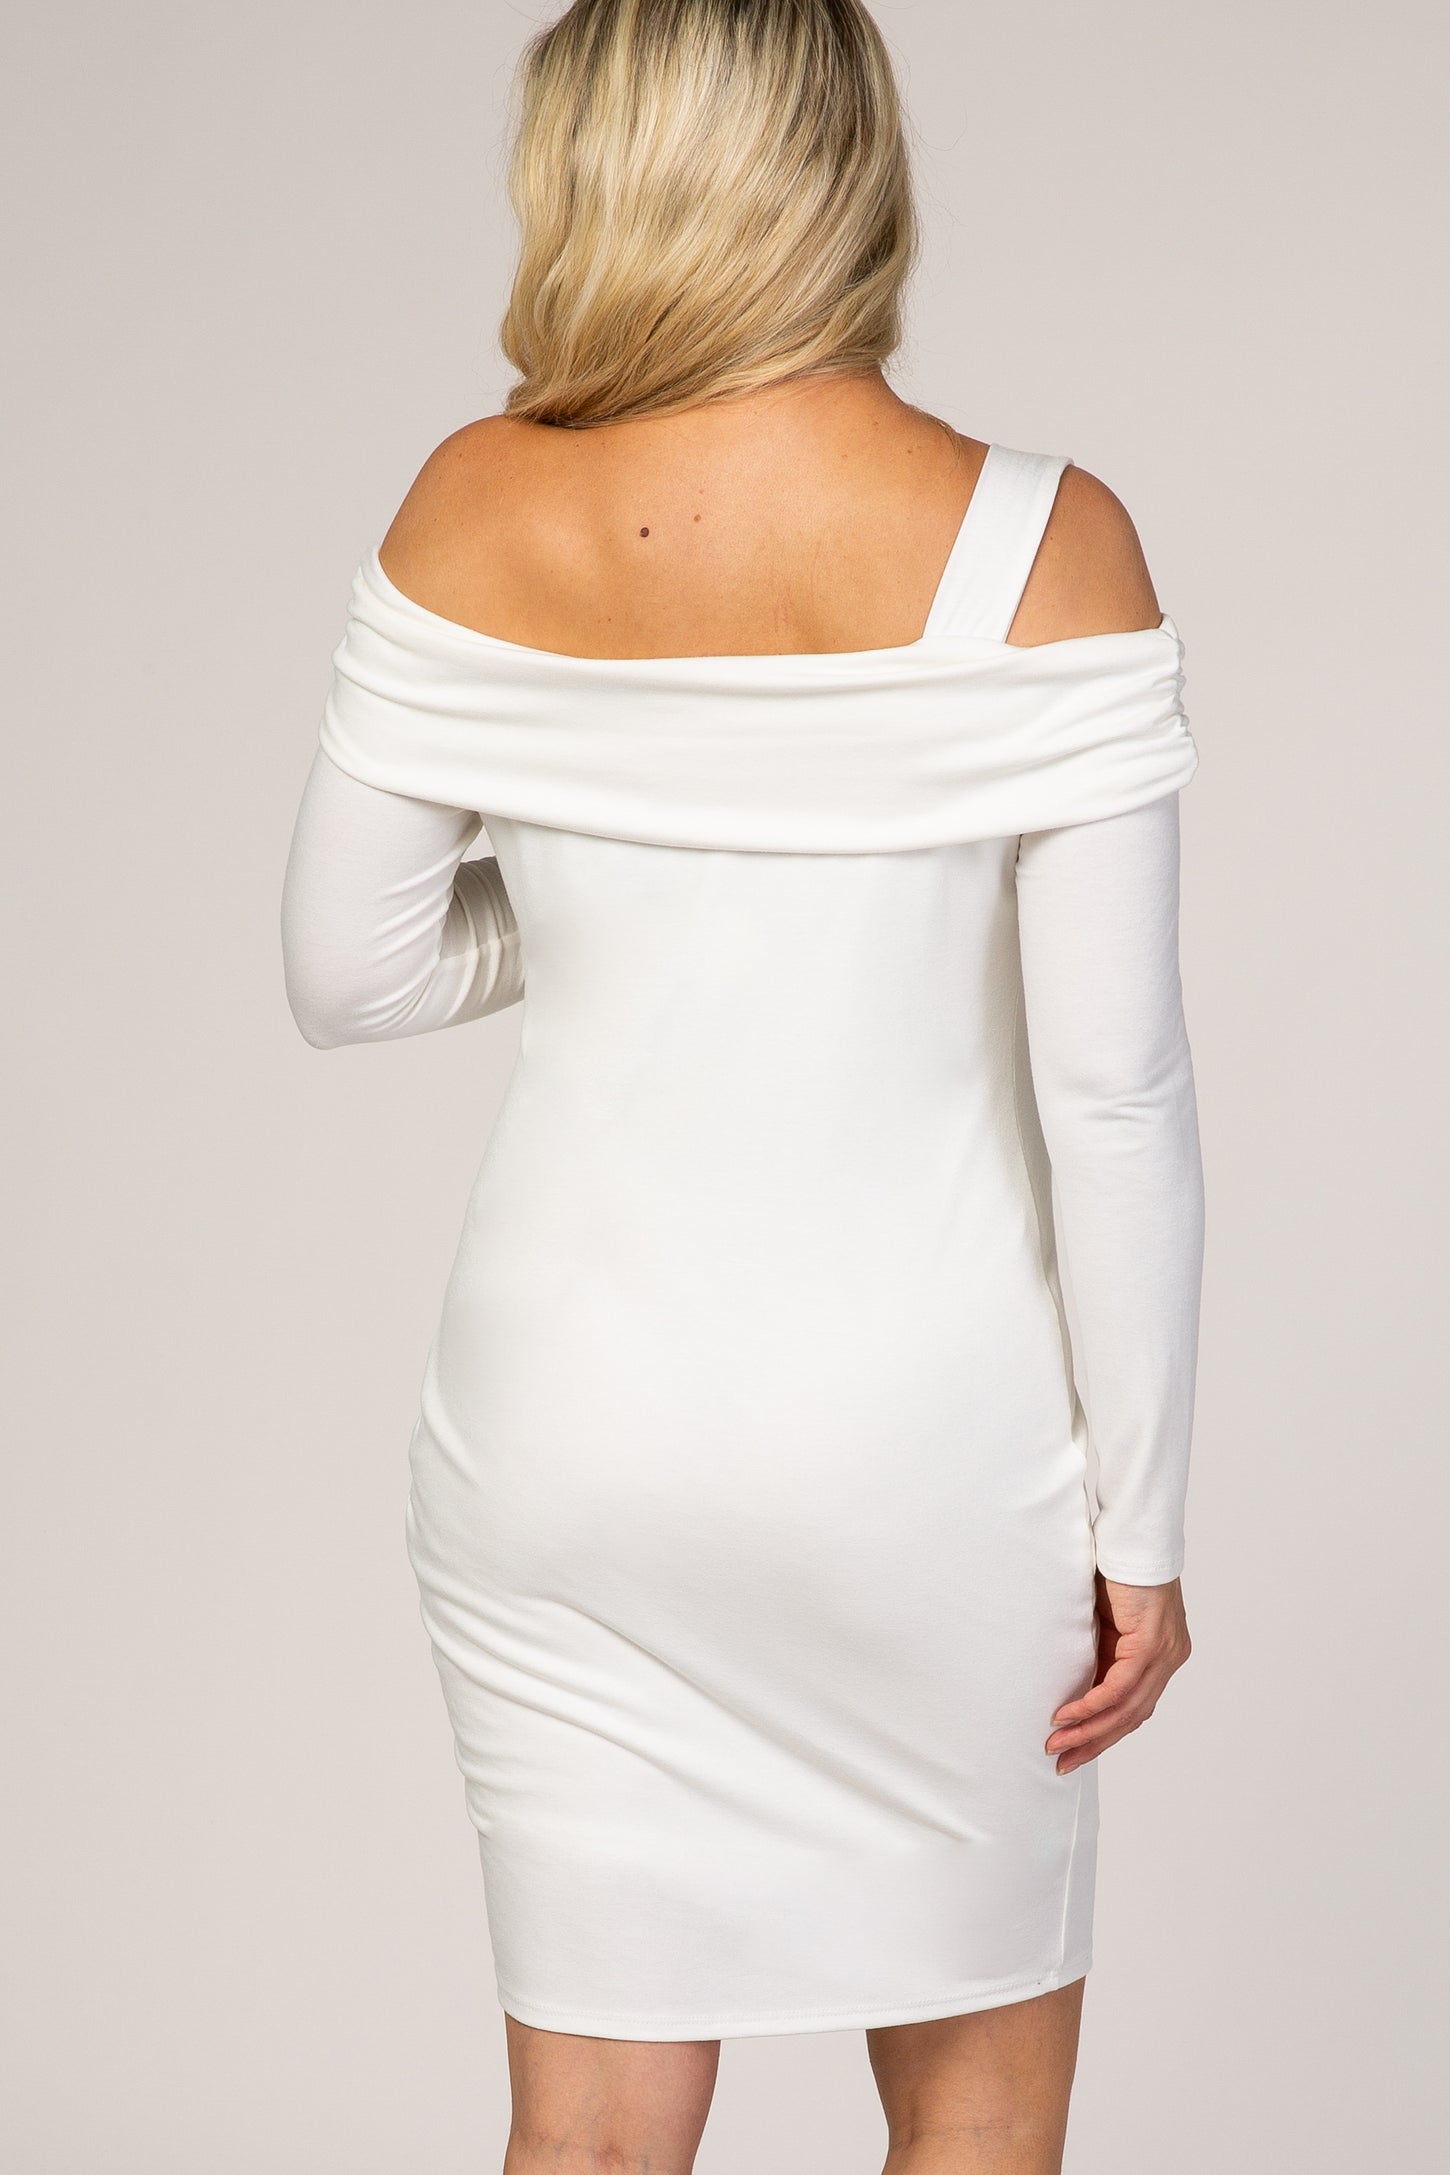 PinkBlush Ivory Fitted One Shoulder Maternity Dress